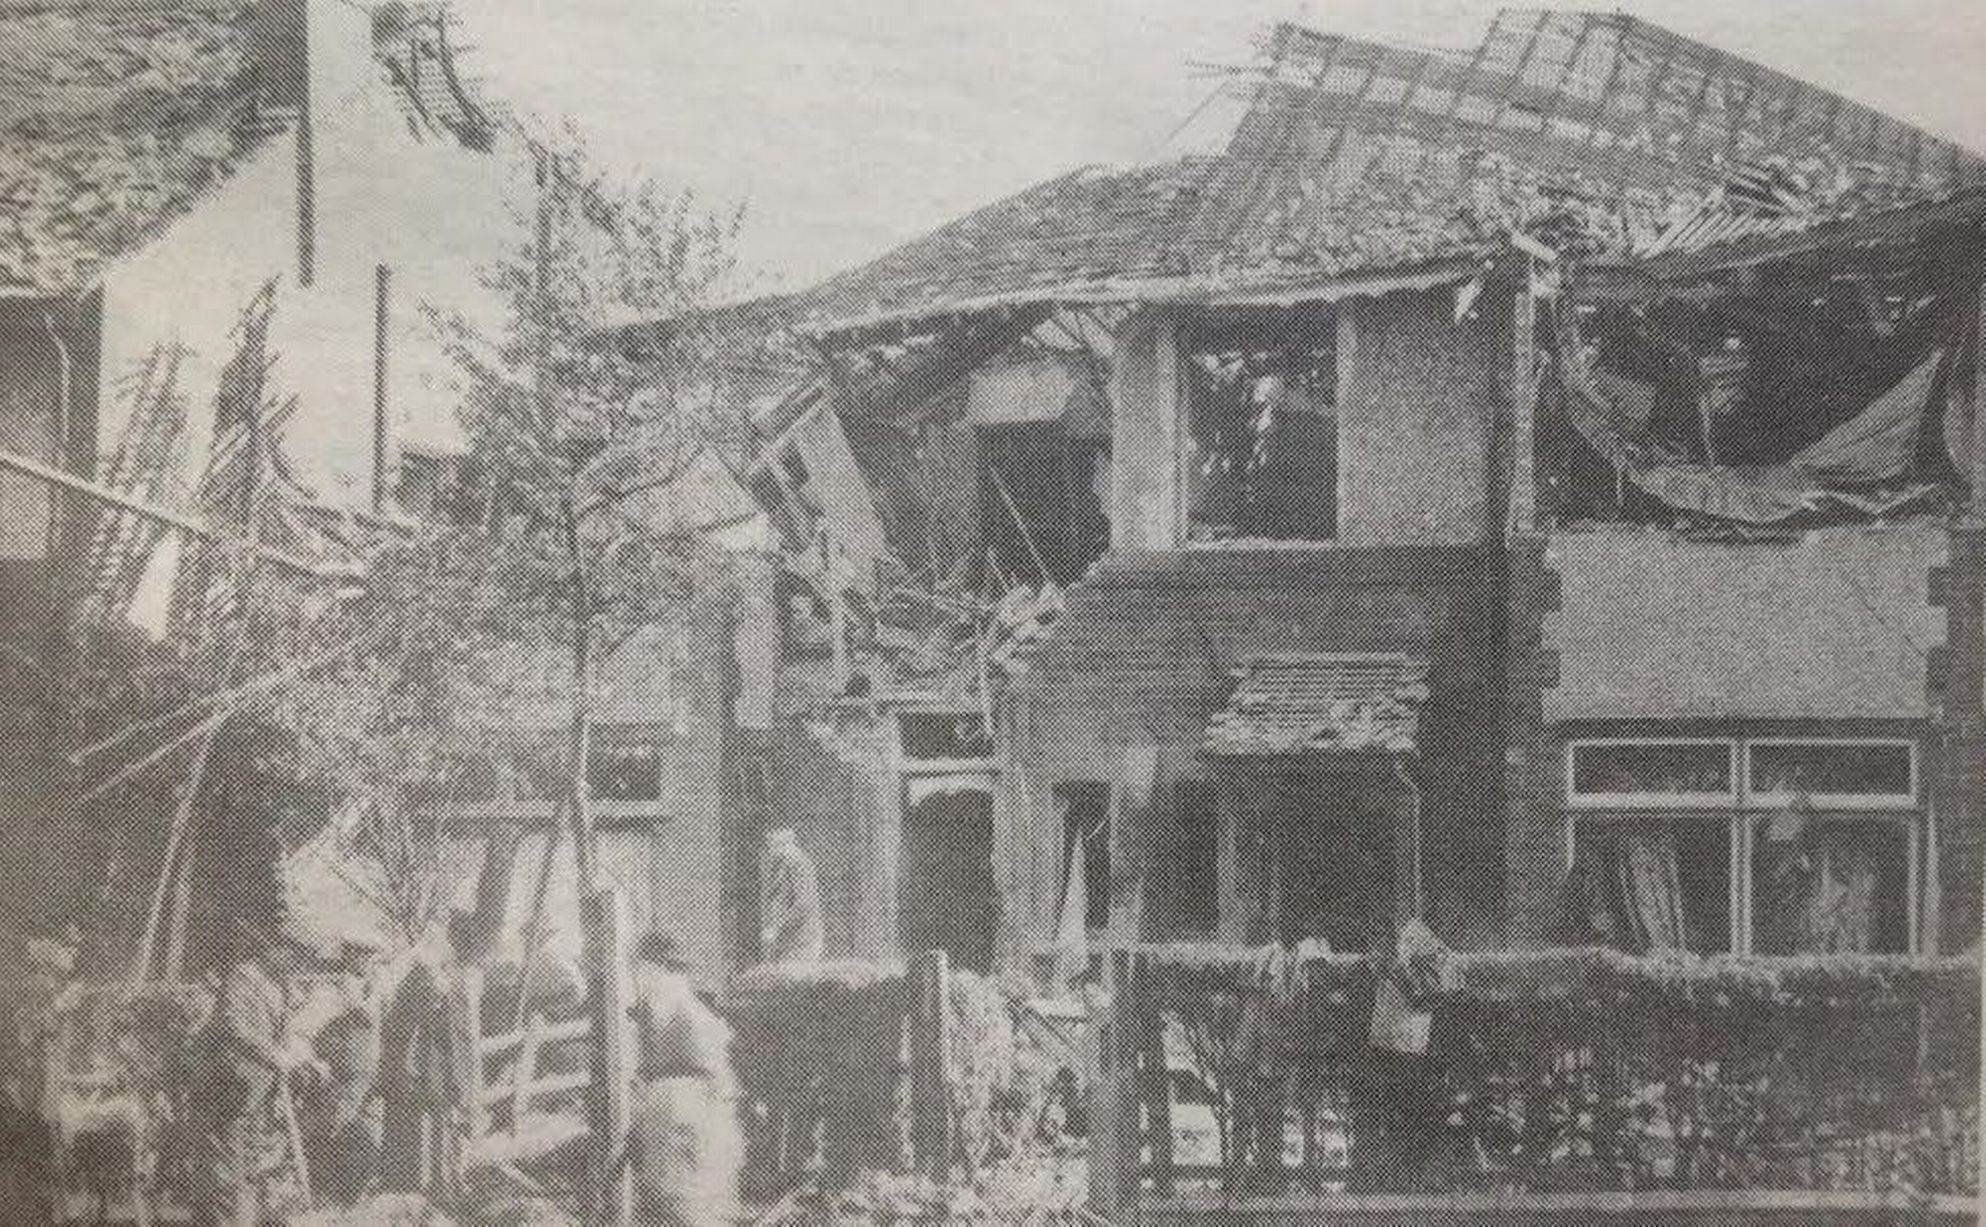 People clear up after bombs from German aircraft destroyed 38 and 40 Manor Avenue in Crosby in the autumn raids of 1940. Life still went on - a passing gent in a bowler hat, rolled umbrella and mackintosh over his arm makes his way to the office